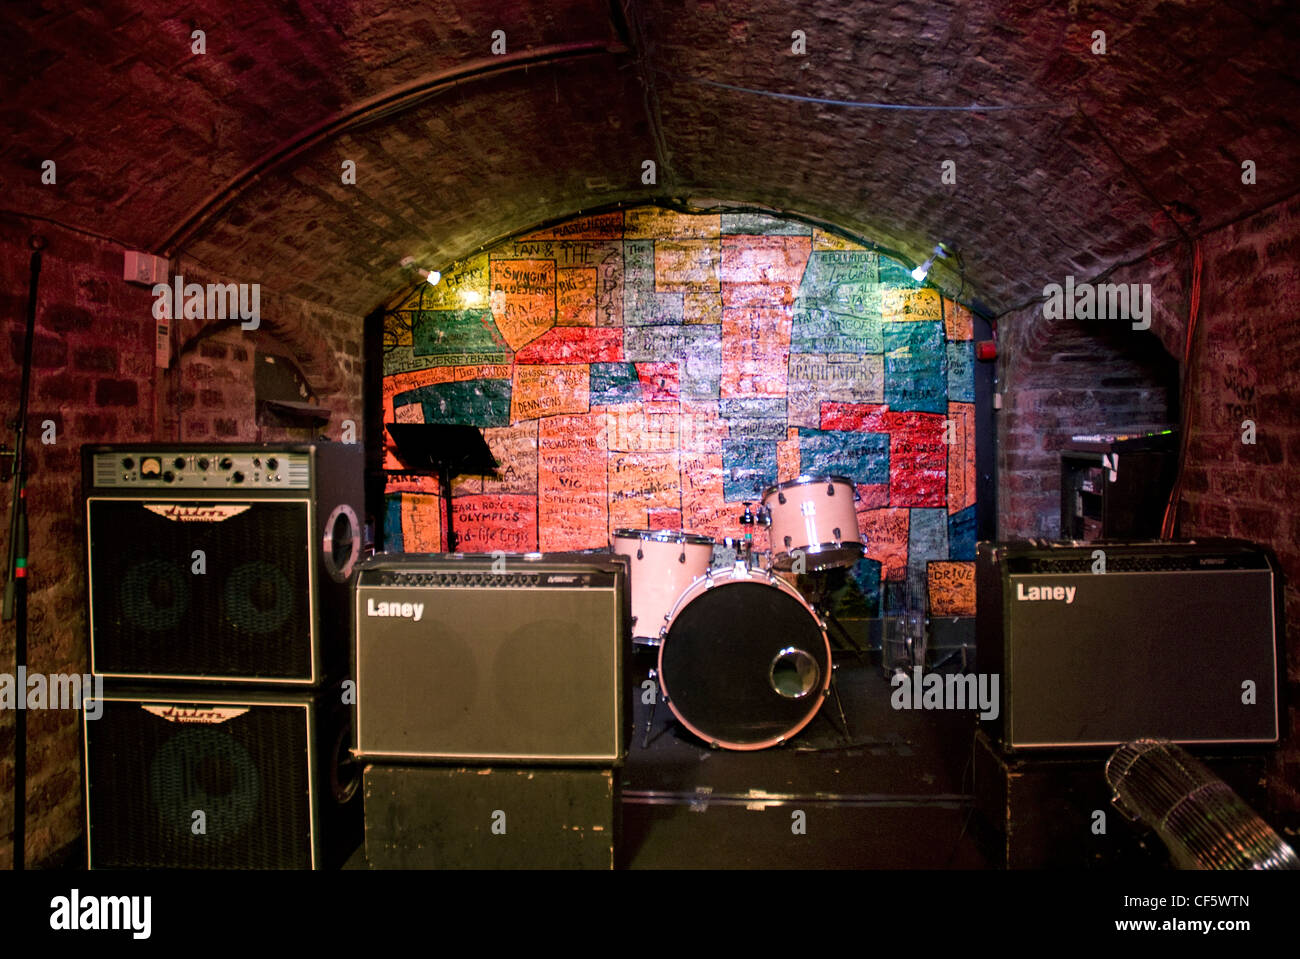 The stage inside The Cavern Club in Mathew Street, the venue where Brian Epstein first saw The Beatles perform in 1961. Stock Photo